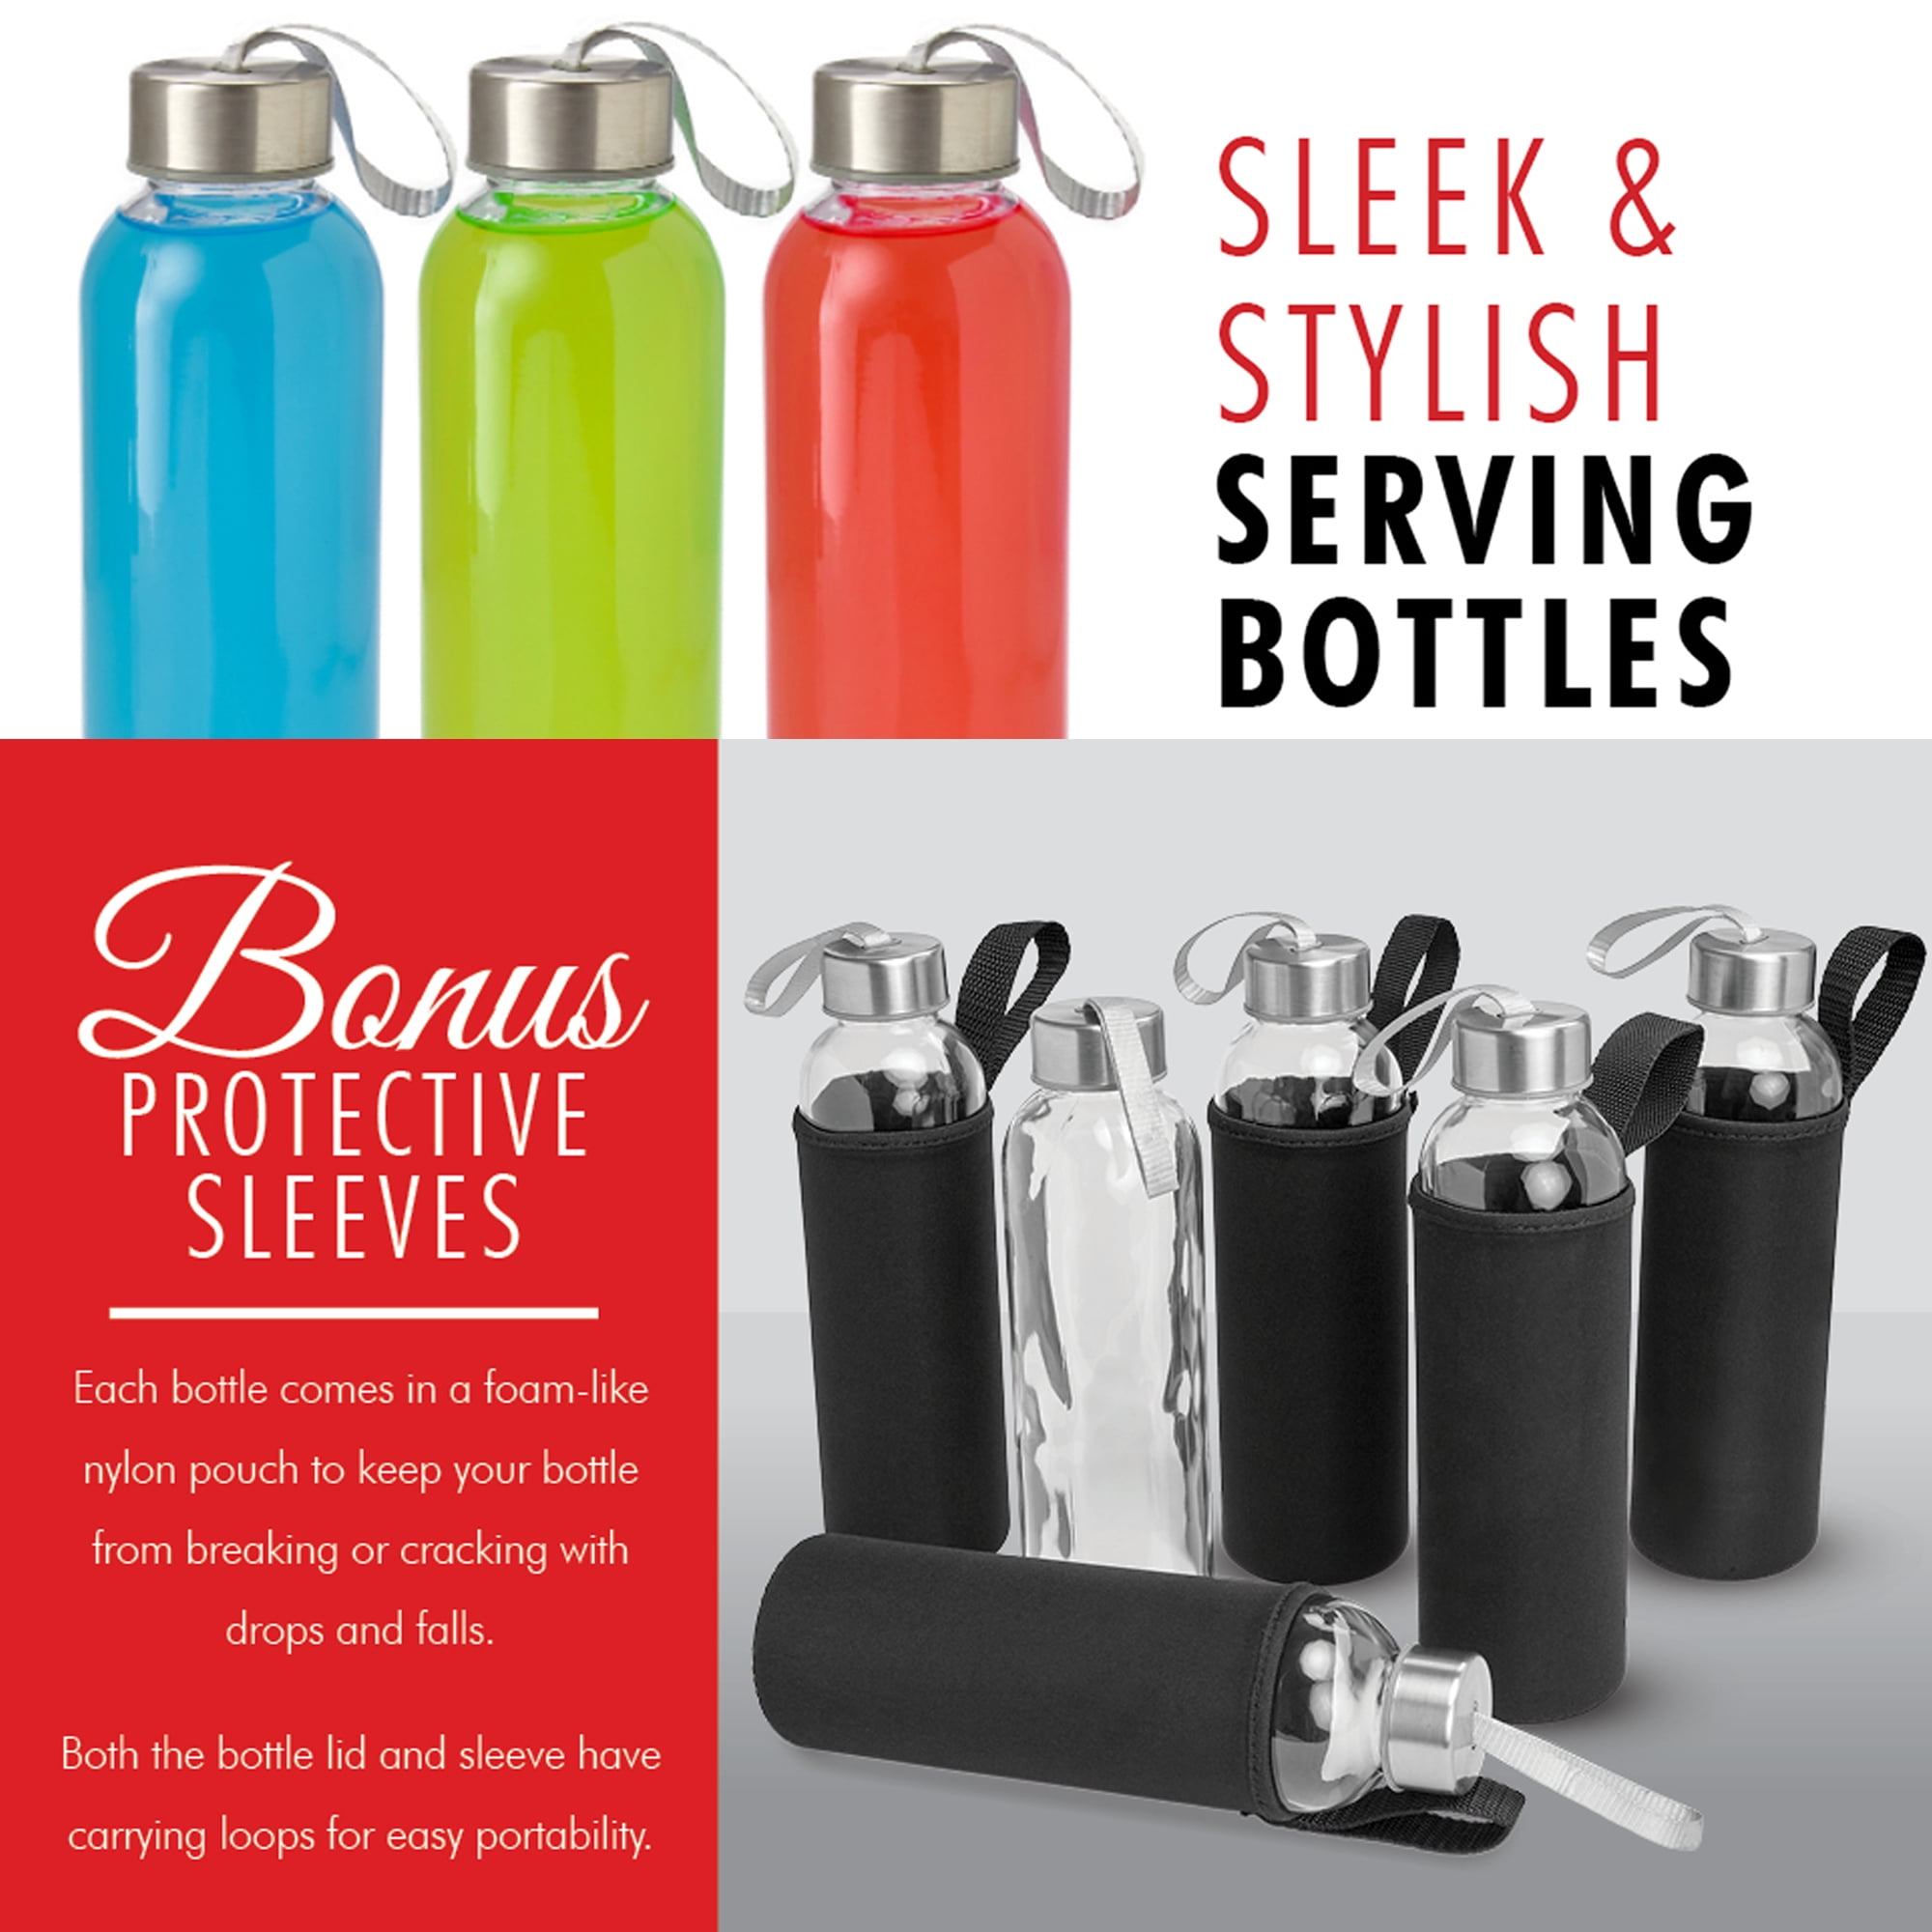 Kitchen Lux 18oz Glass Water Bottles – Pack of 4 Nylon Protective Sleeves,  Airtight Screw Top Lids, …See more Kitchen Lux 18oz Glass Water Bottles –